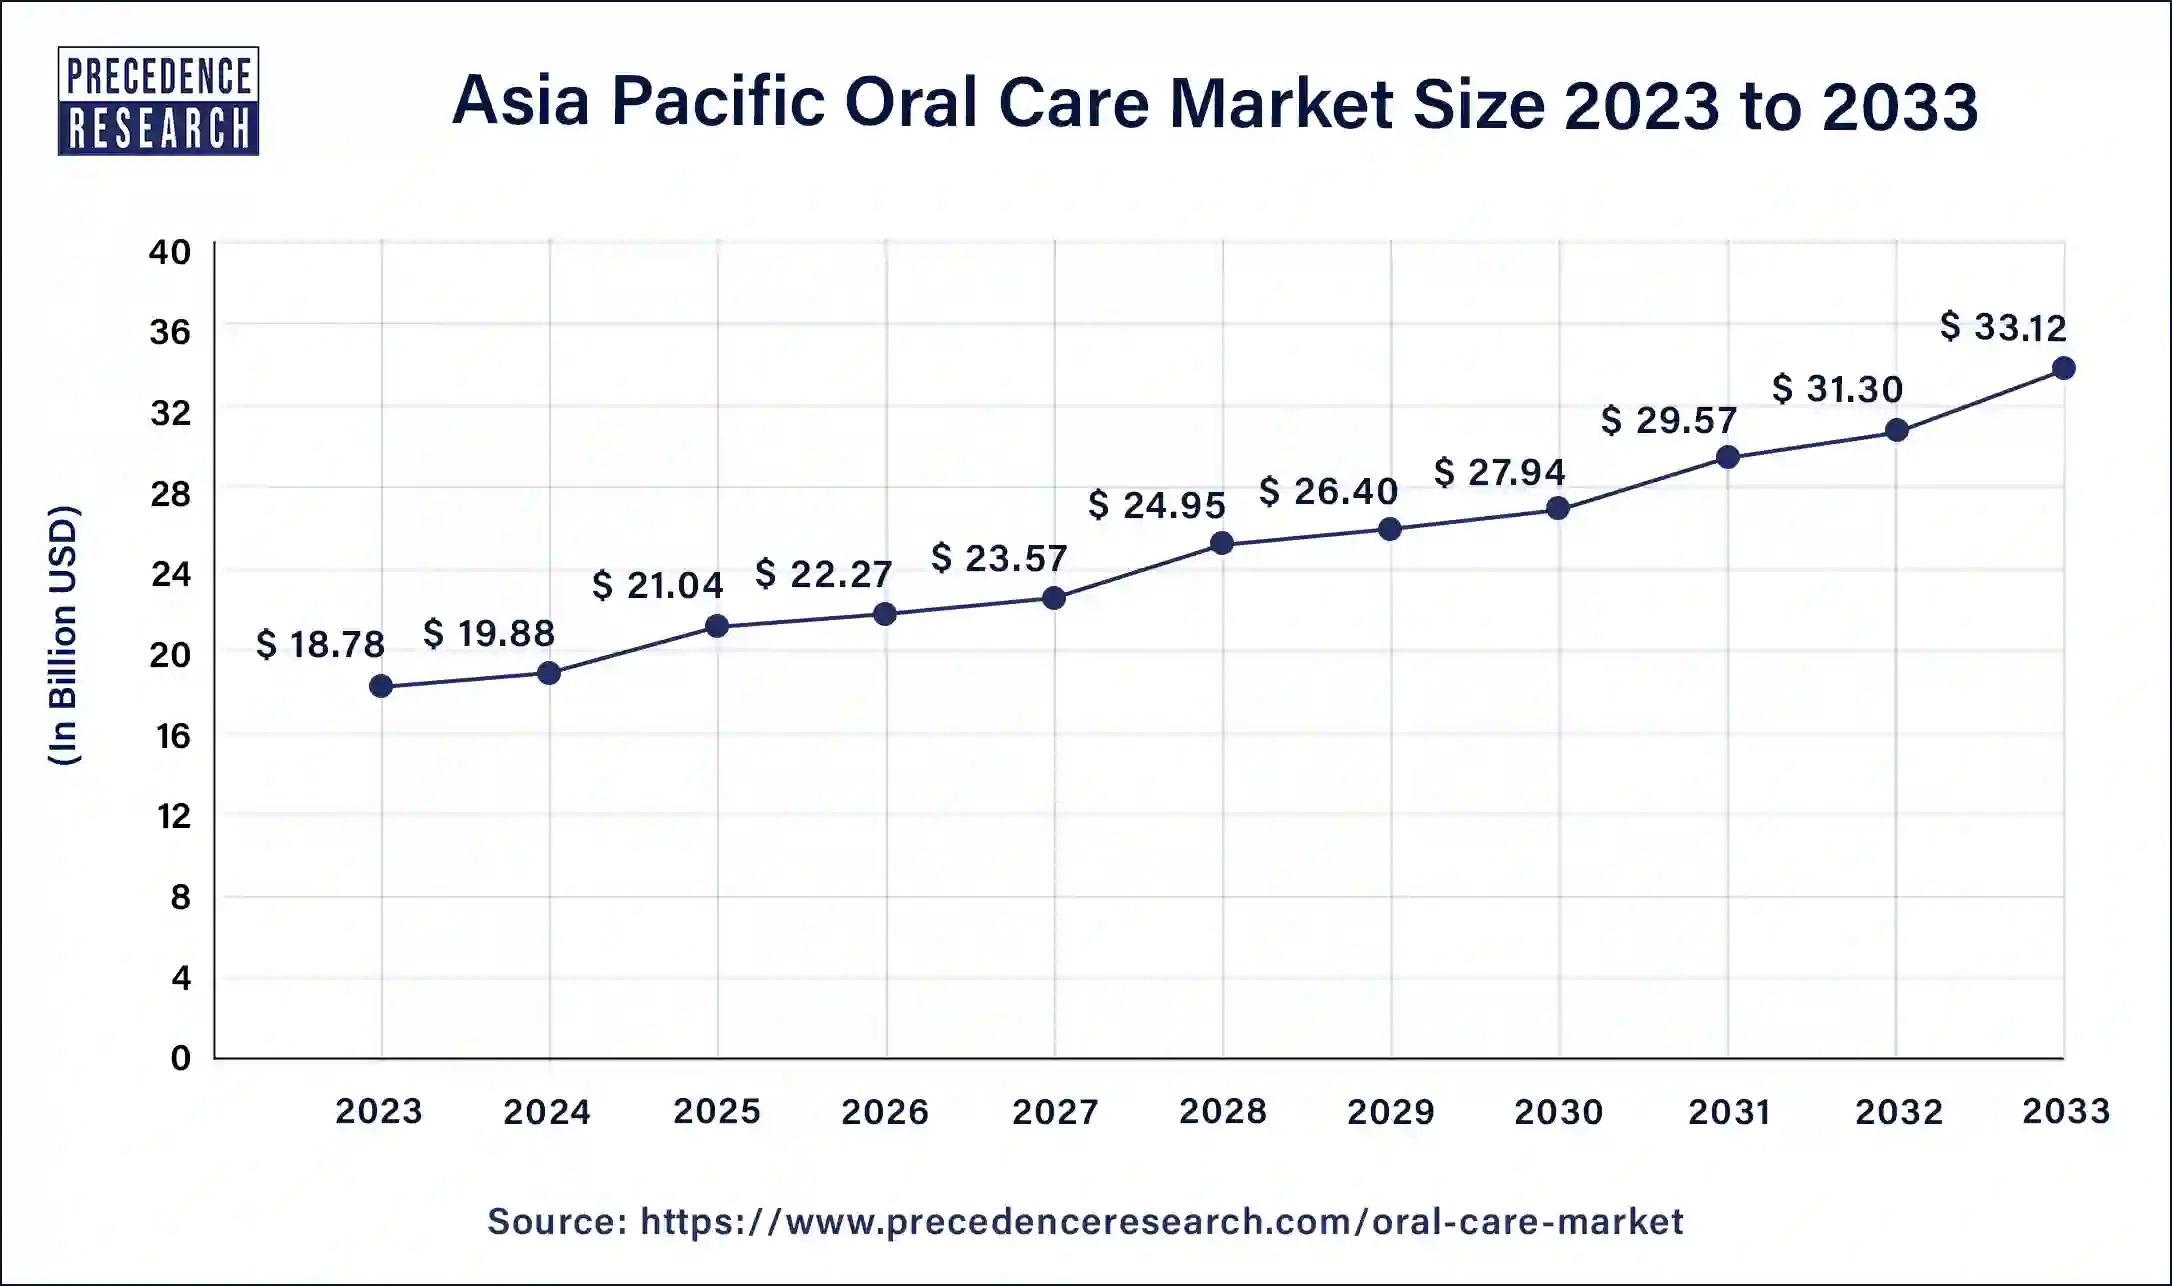 Asia Pacific Oral Care Market Size 2024 to 2033